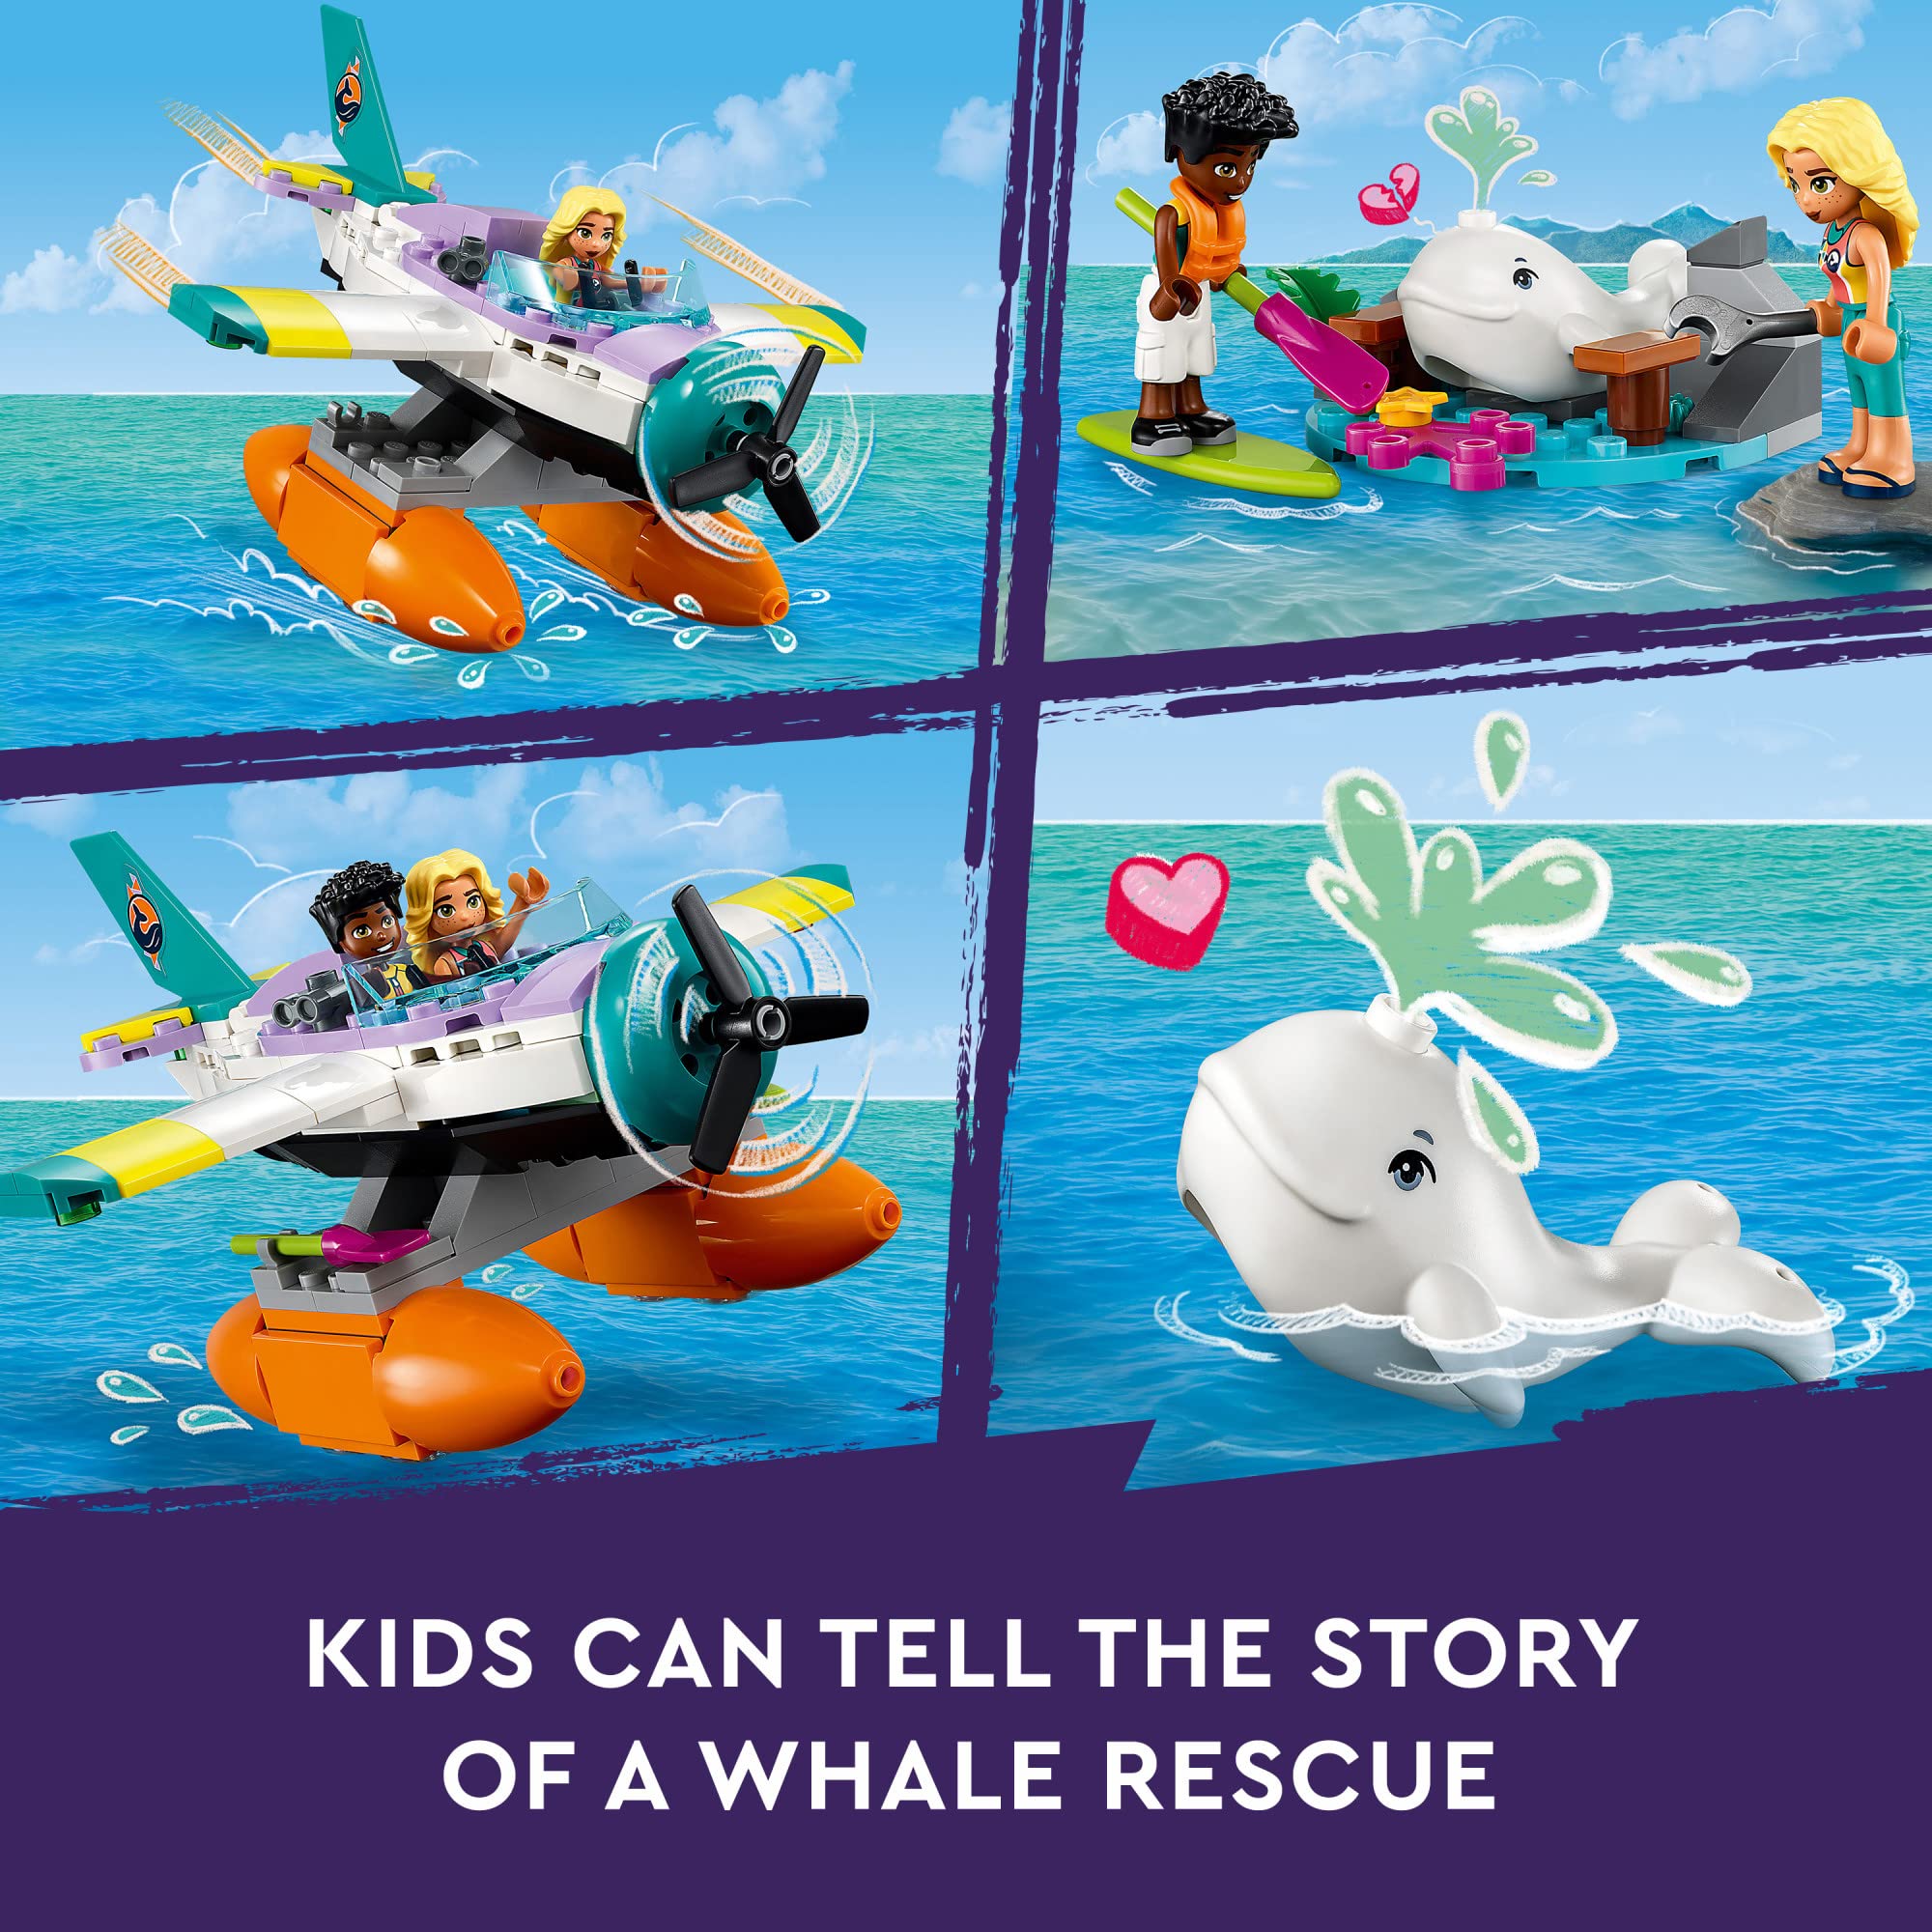 LEGO Friends Sea Rescue Plane 41752 Building Toy, Creative Fun for Girls and Boys Ages 6+, Includes 2 Mini-Dolls and a White Whale Plus Lots of Accessories, A Fun Gift for Kids Who Love Sea Life